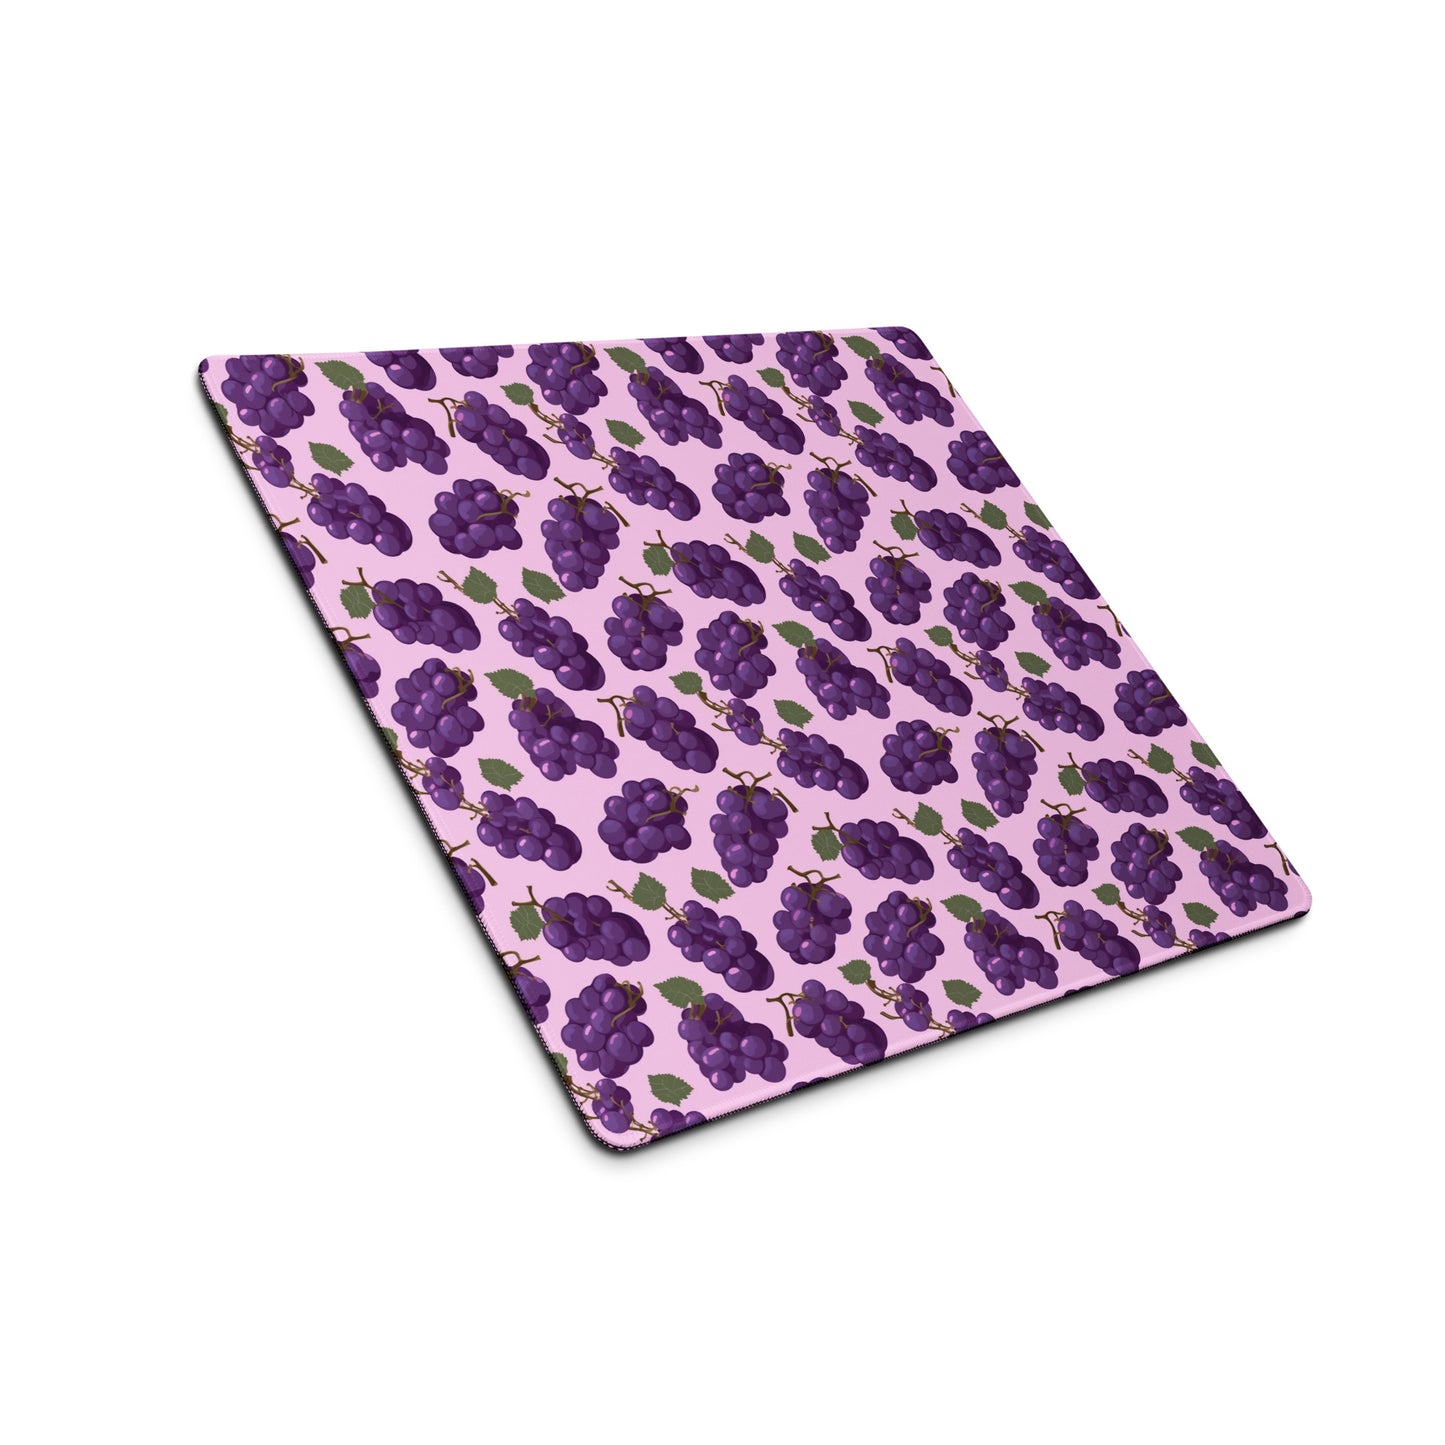 A 18" x 16" desk pad with bushels of grapes all over it shown at an angle. Purple in color.